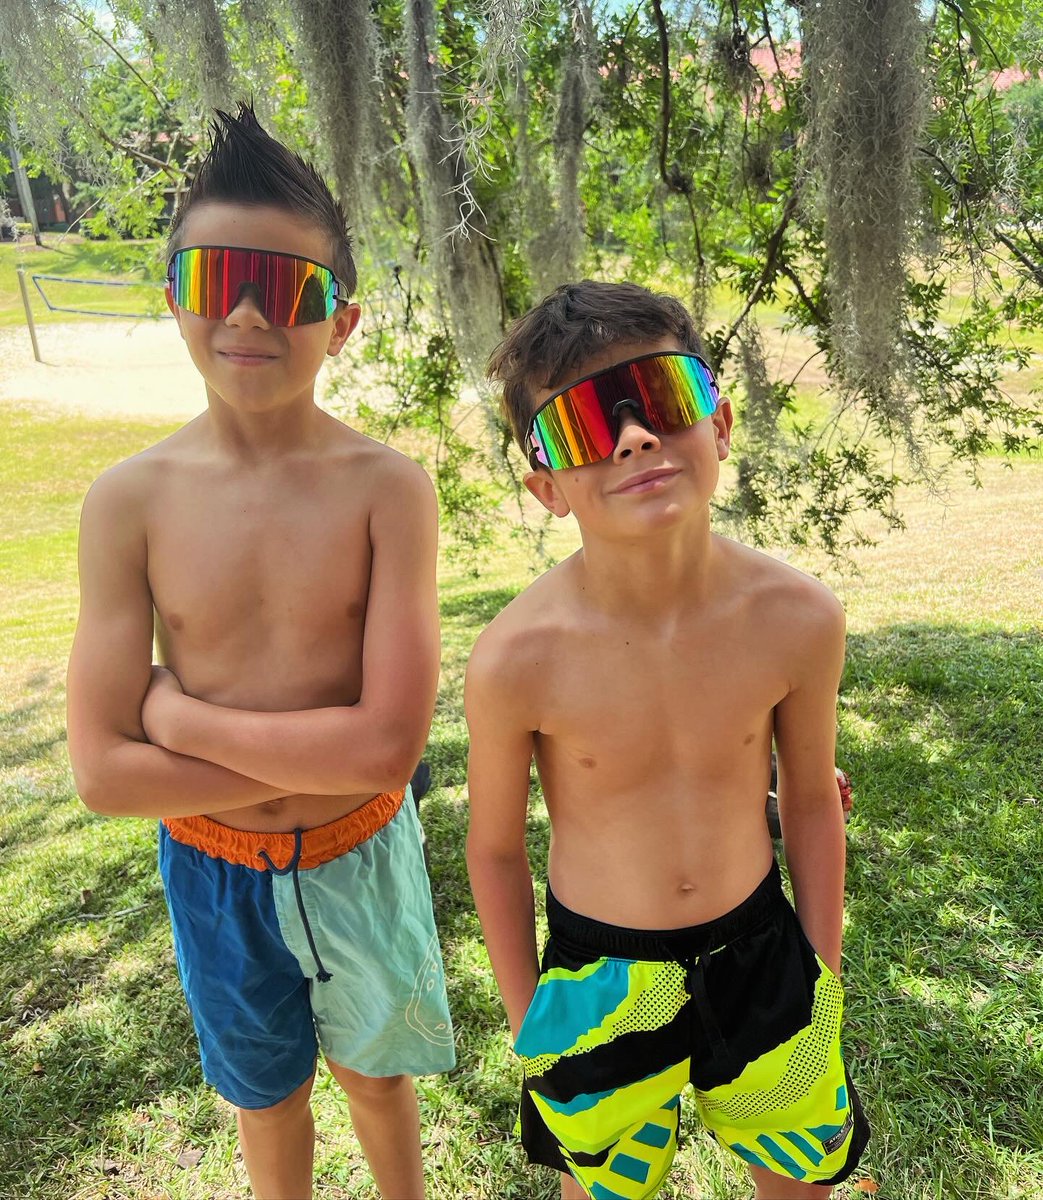 Cool kids in town … #orlando #florida #family #travel